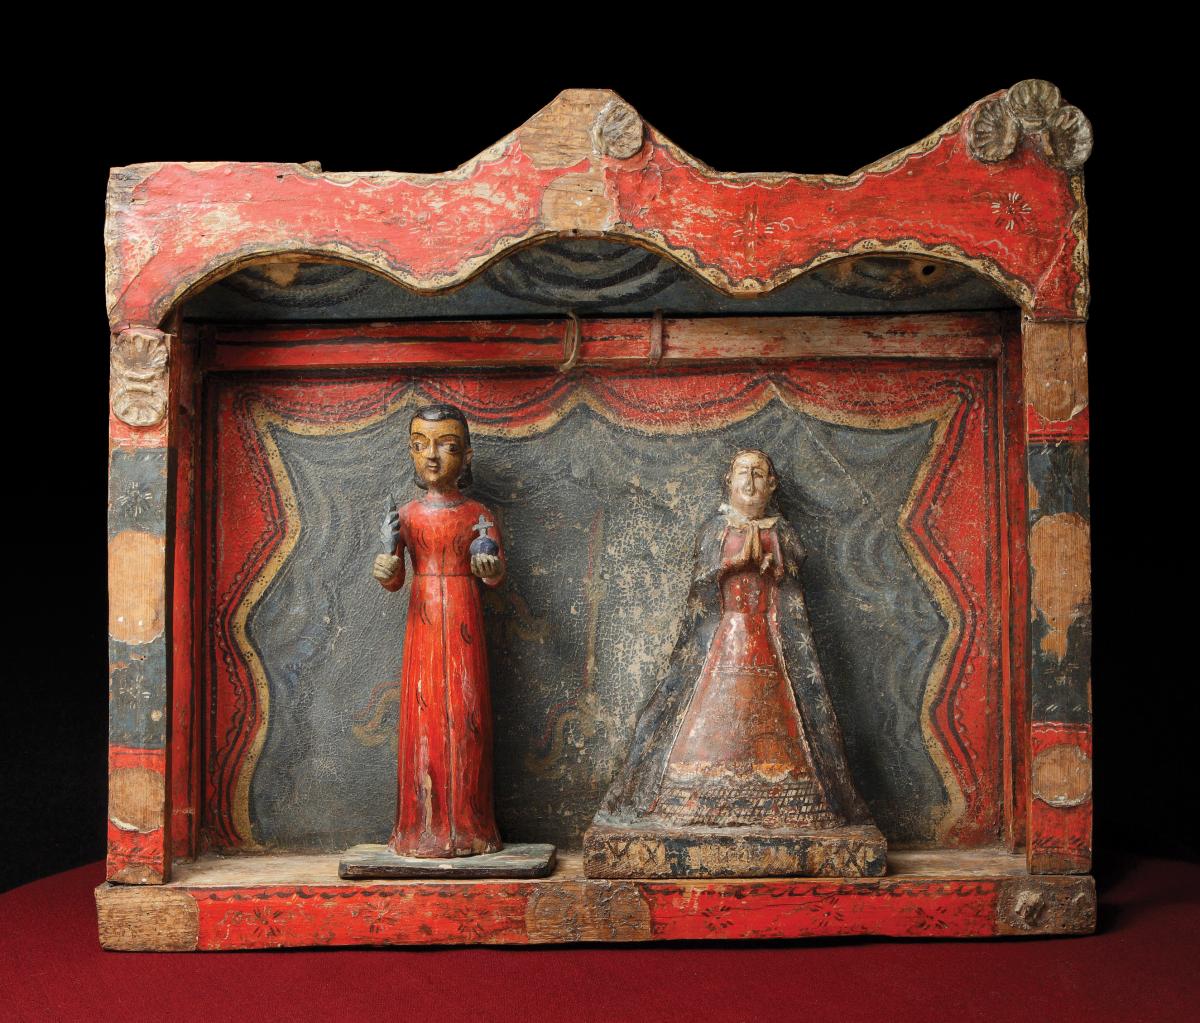 two wooden figures of saints, framed in a red wood